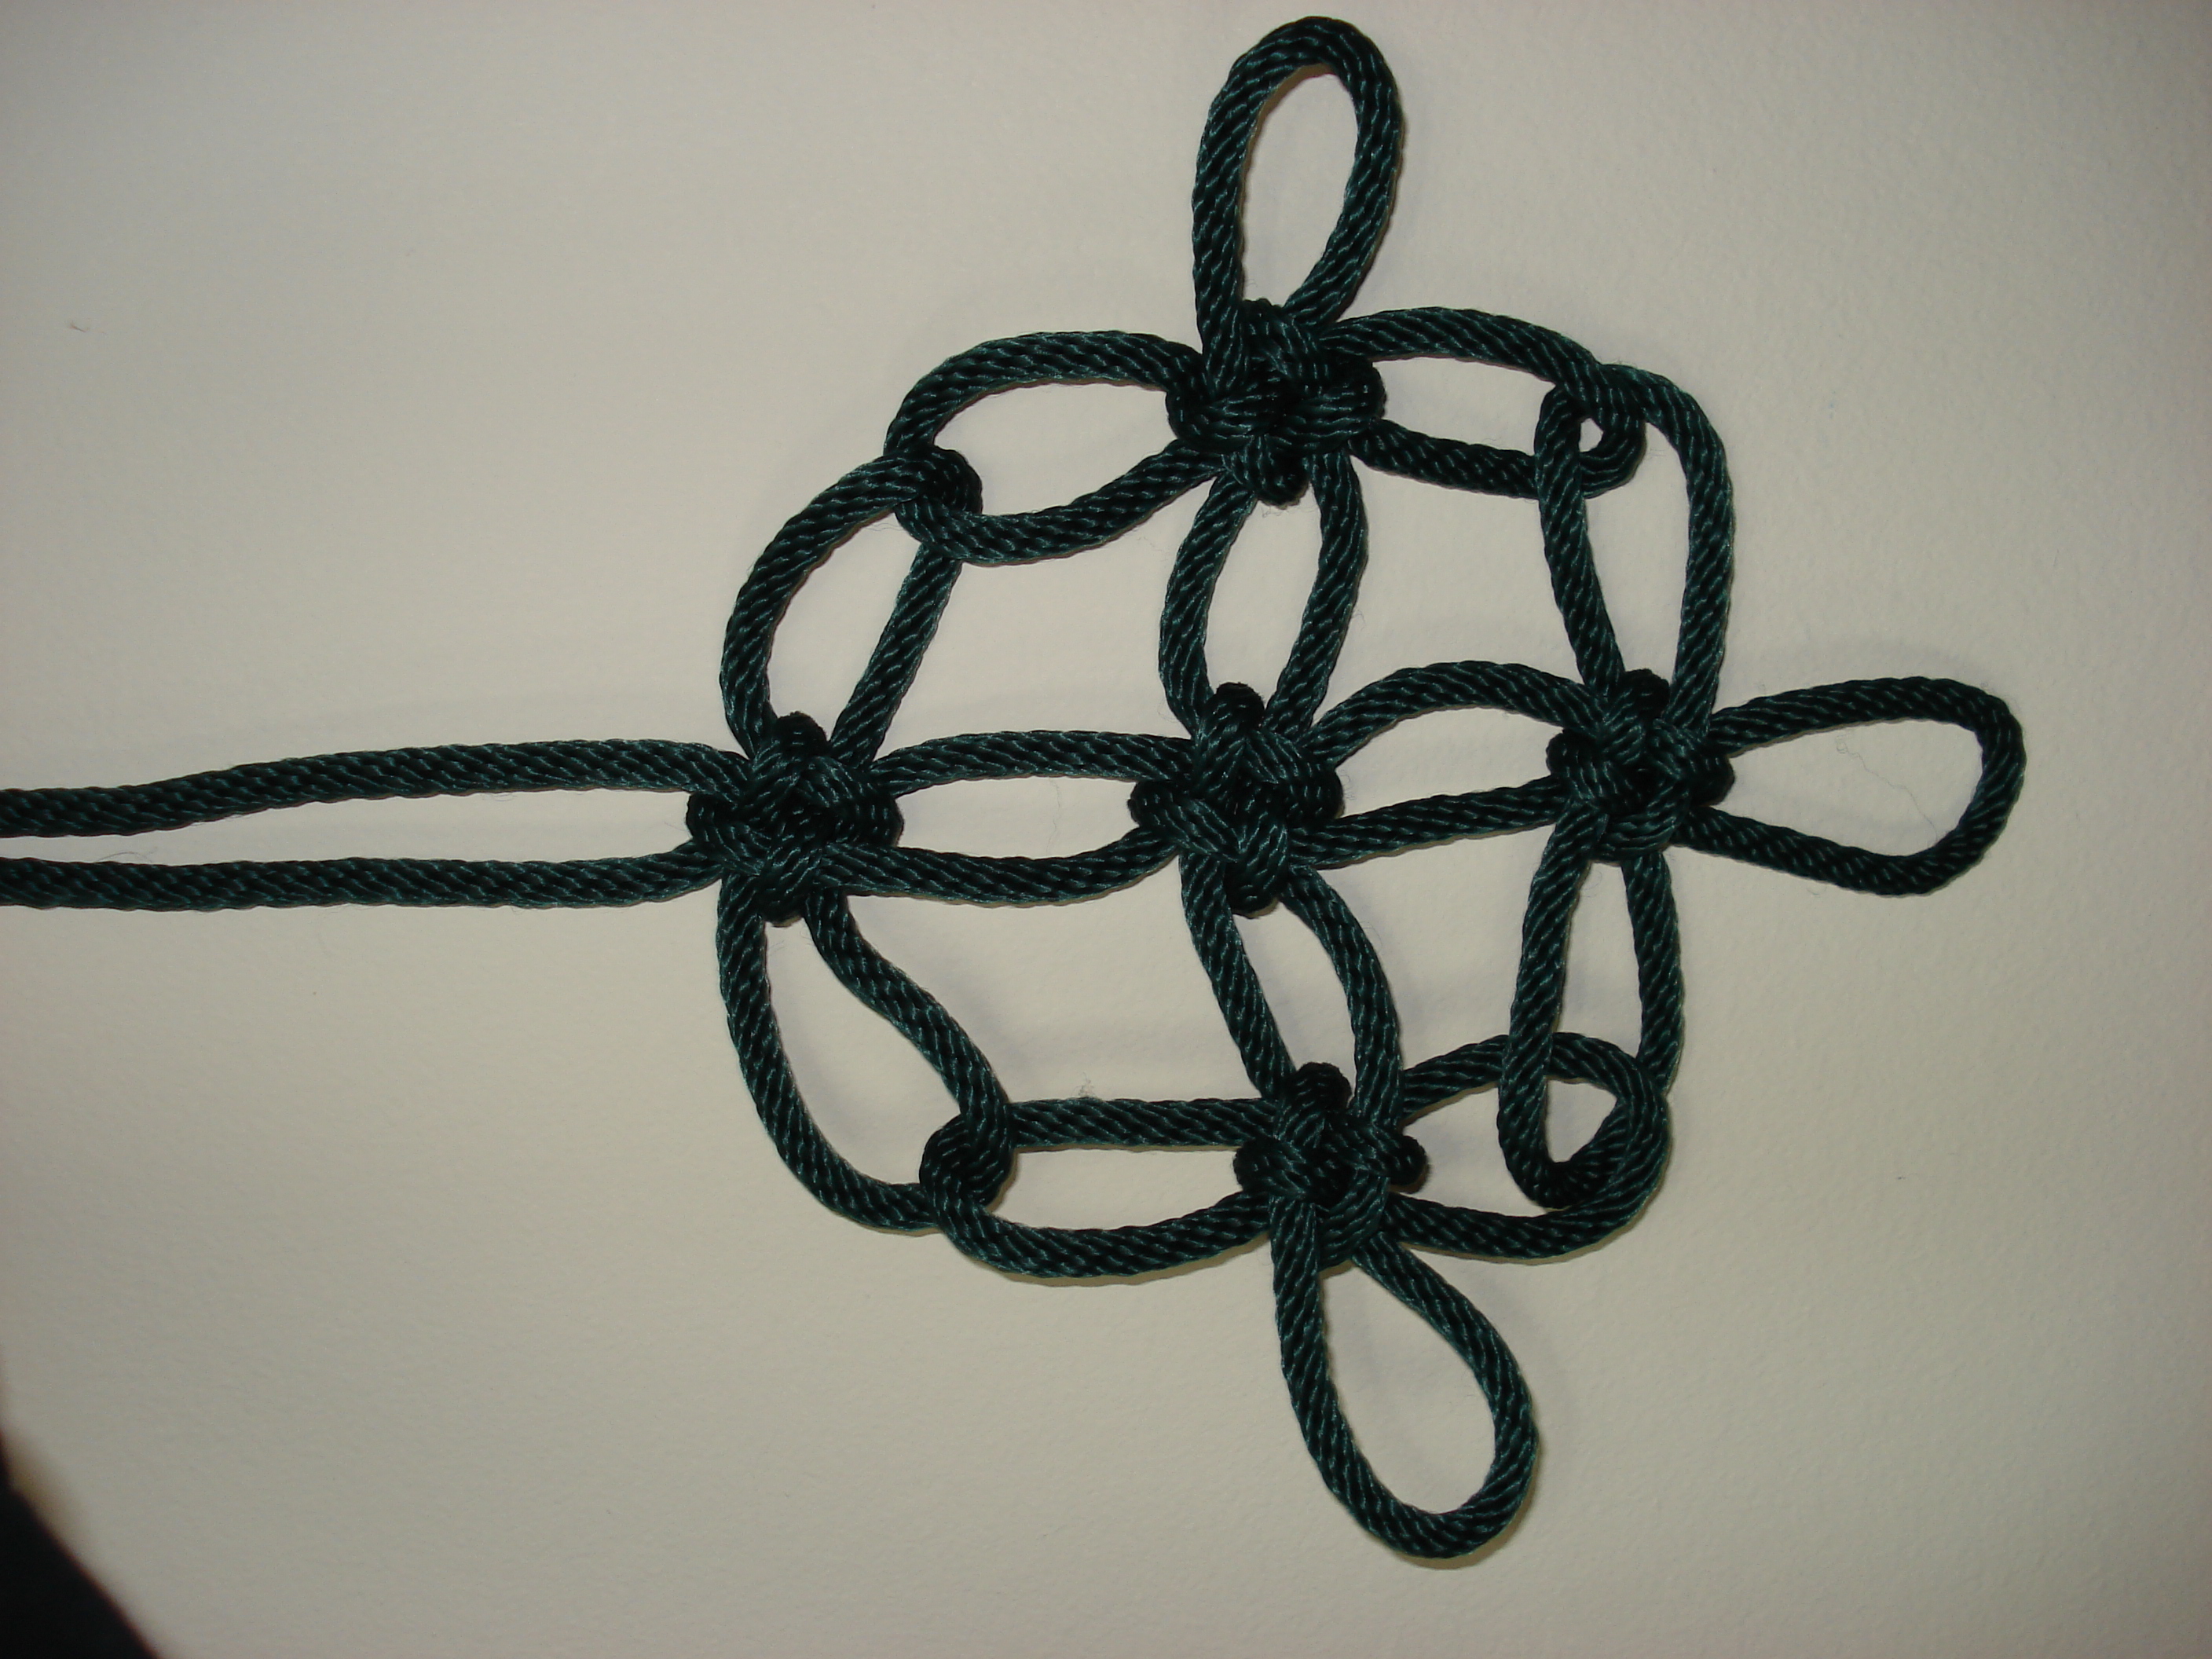 5641000-knot 001